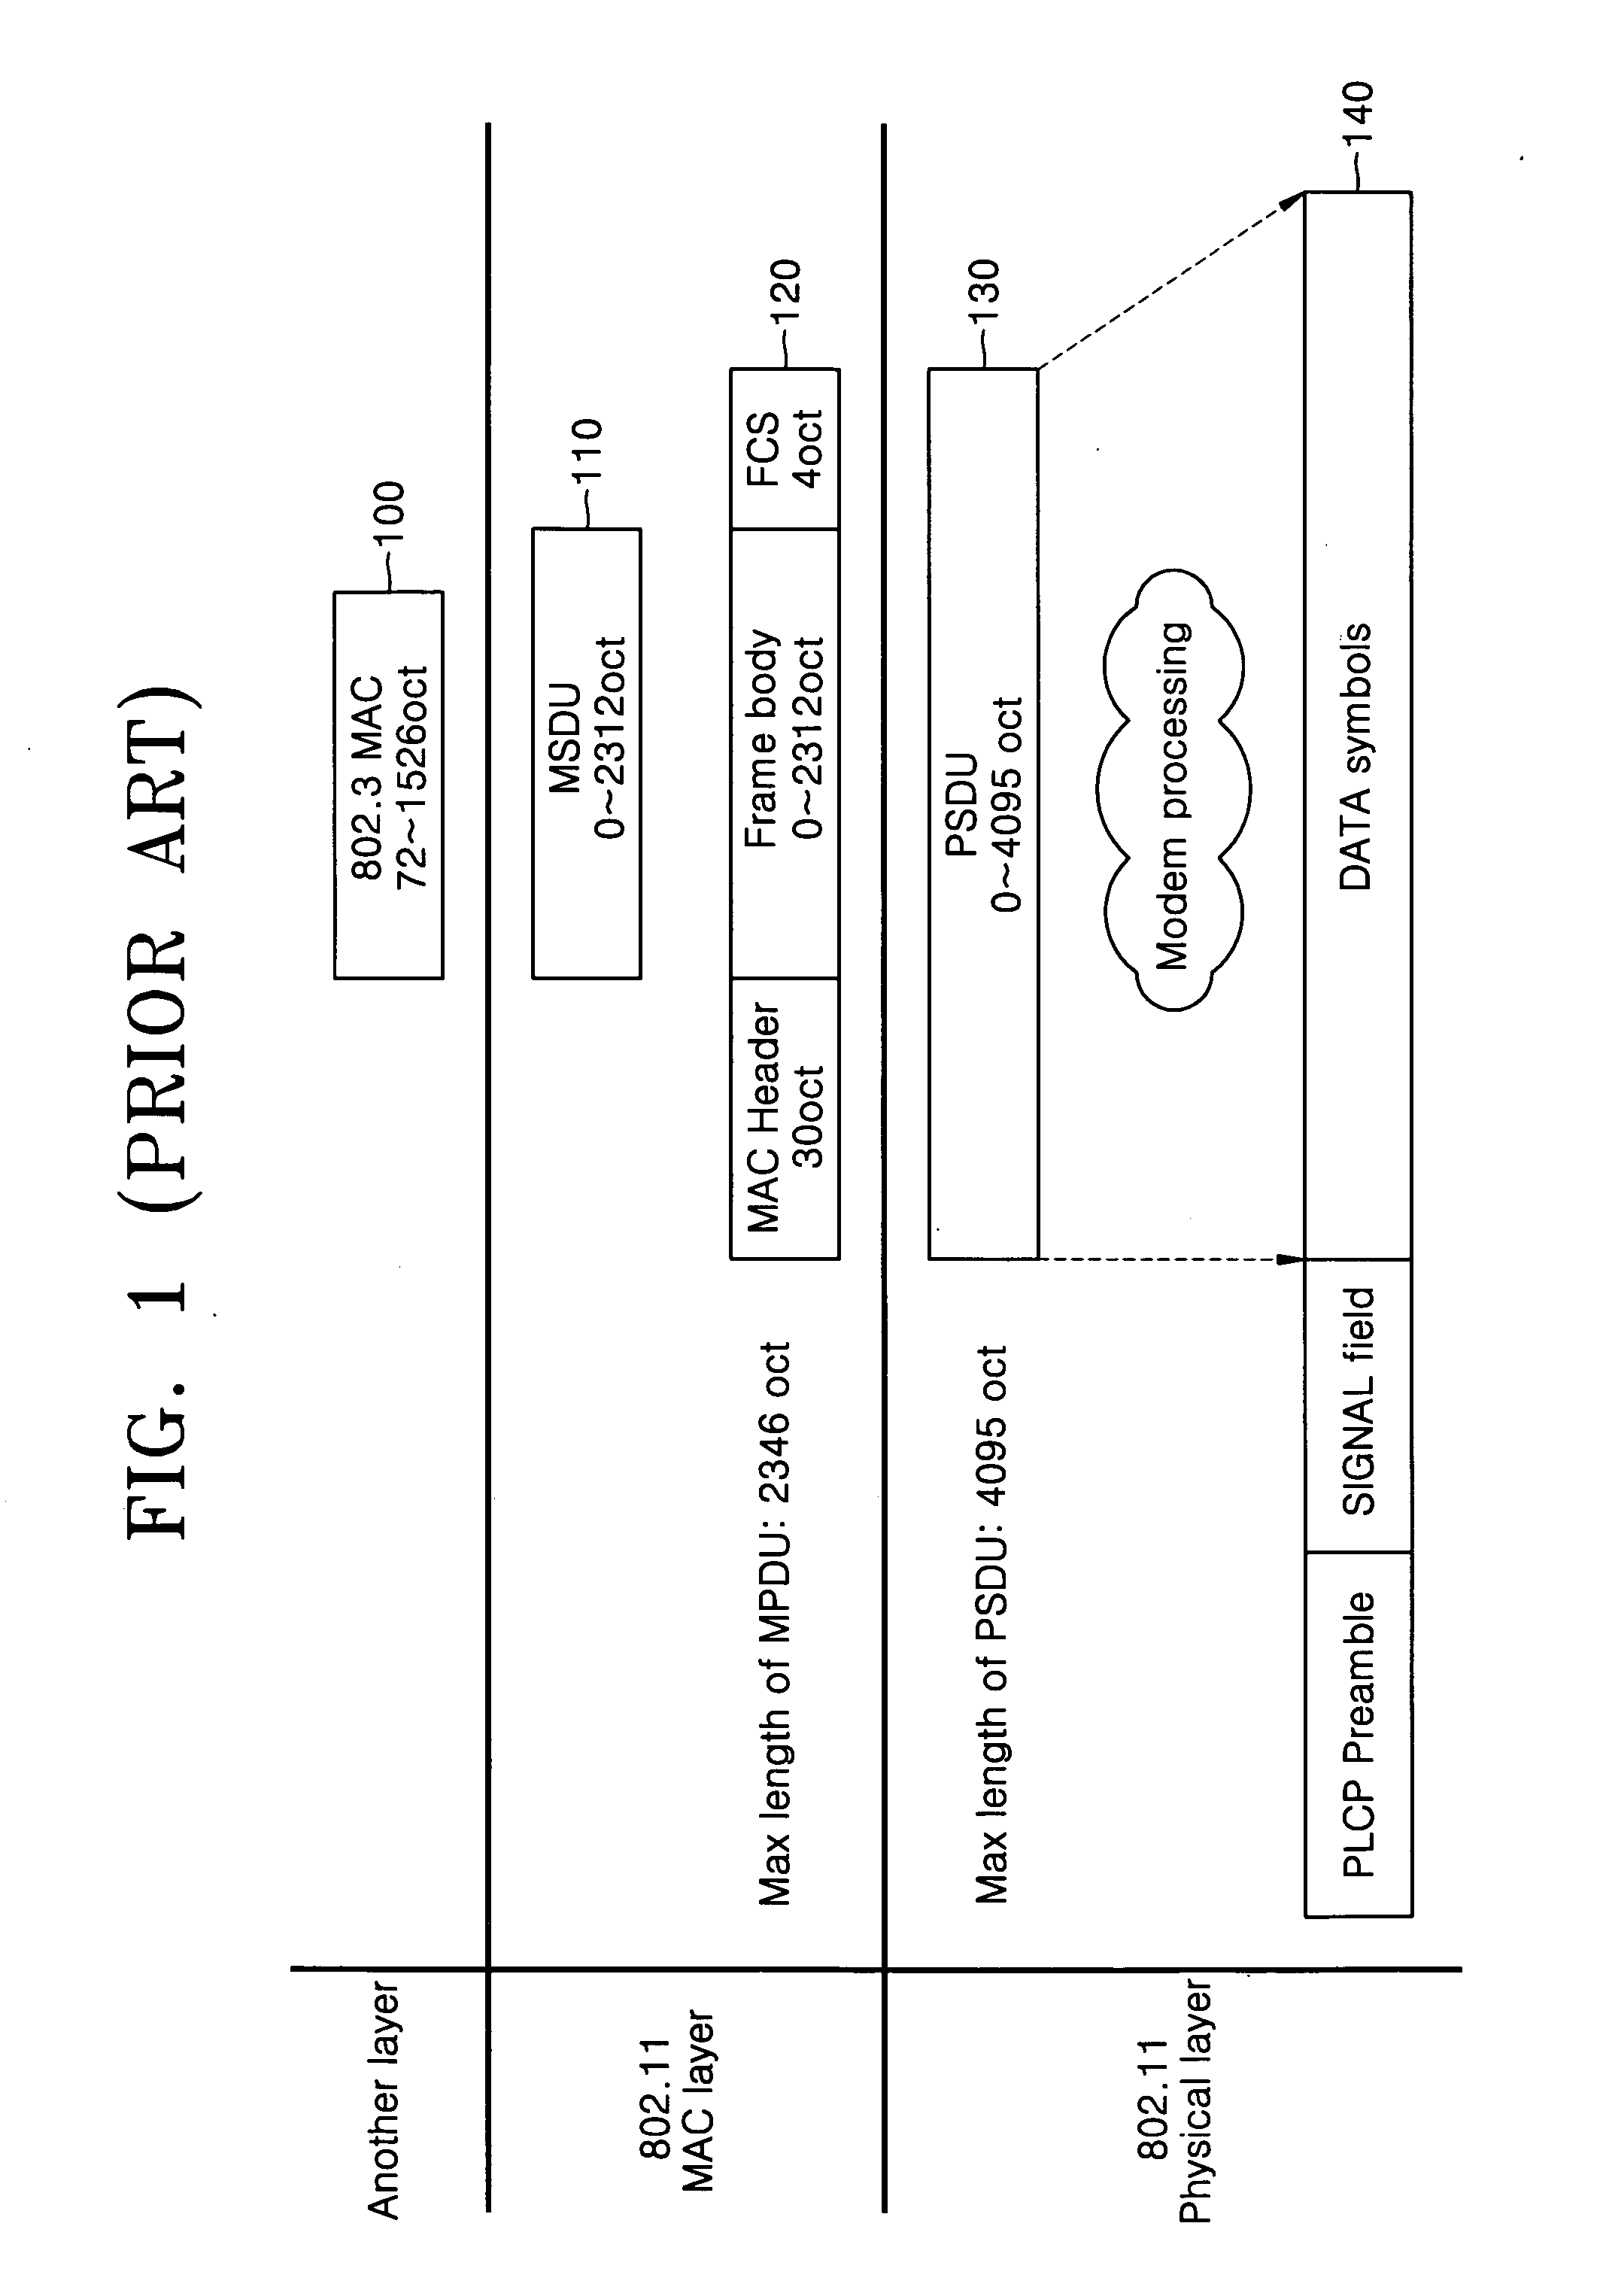 Method of dividing a payload intra-frame